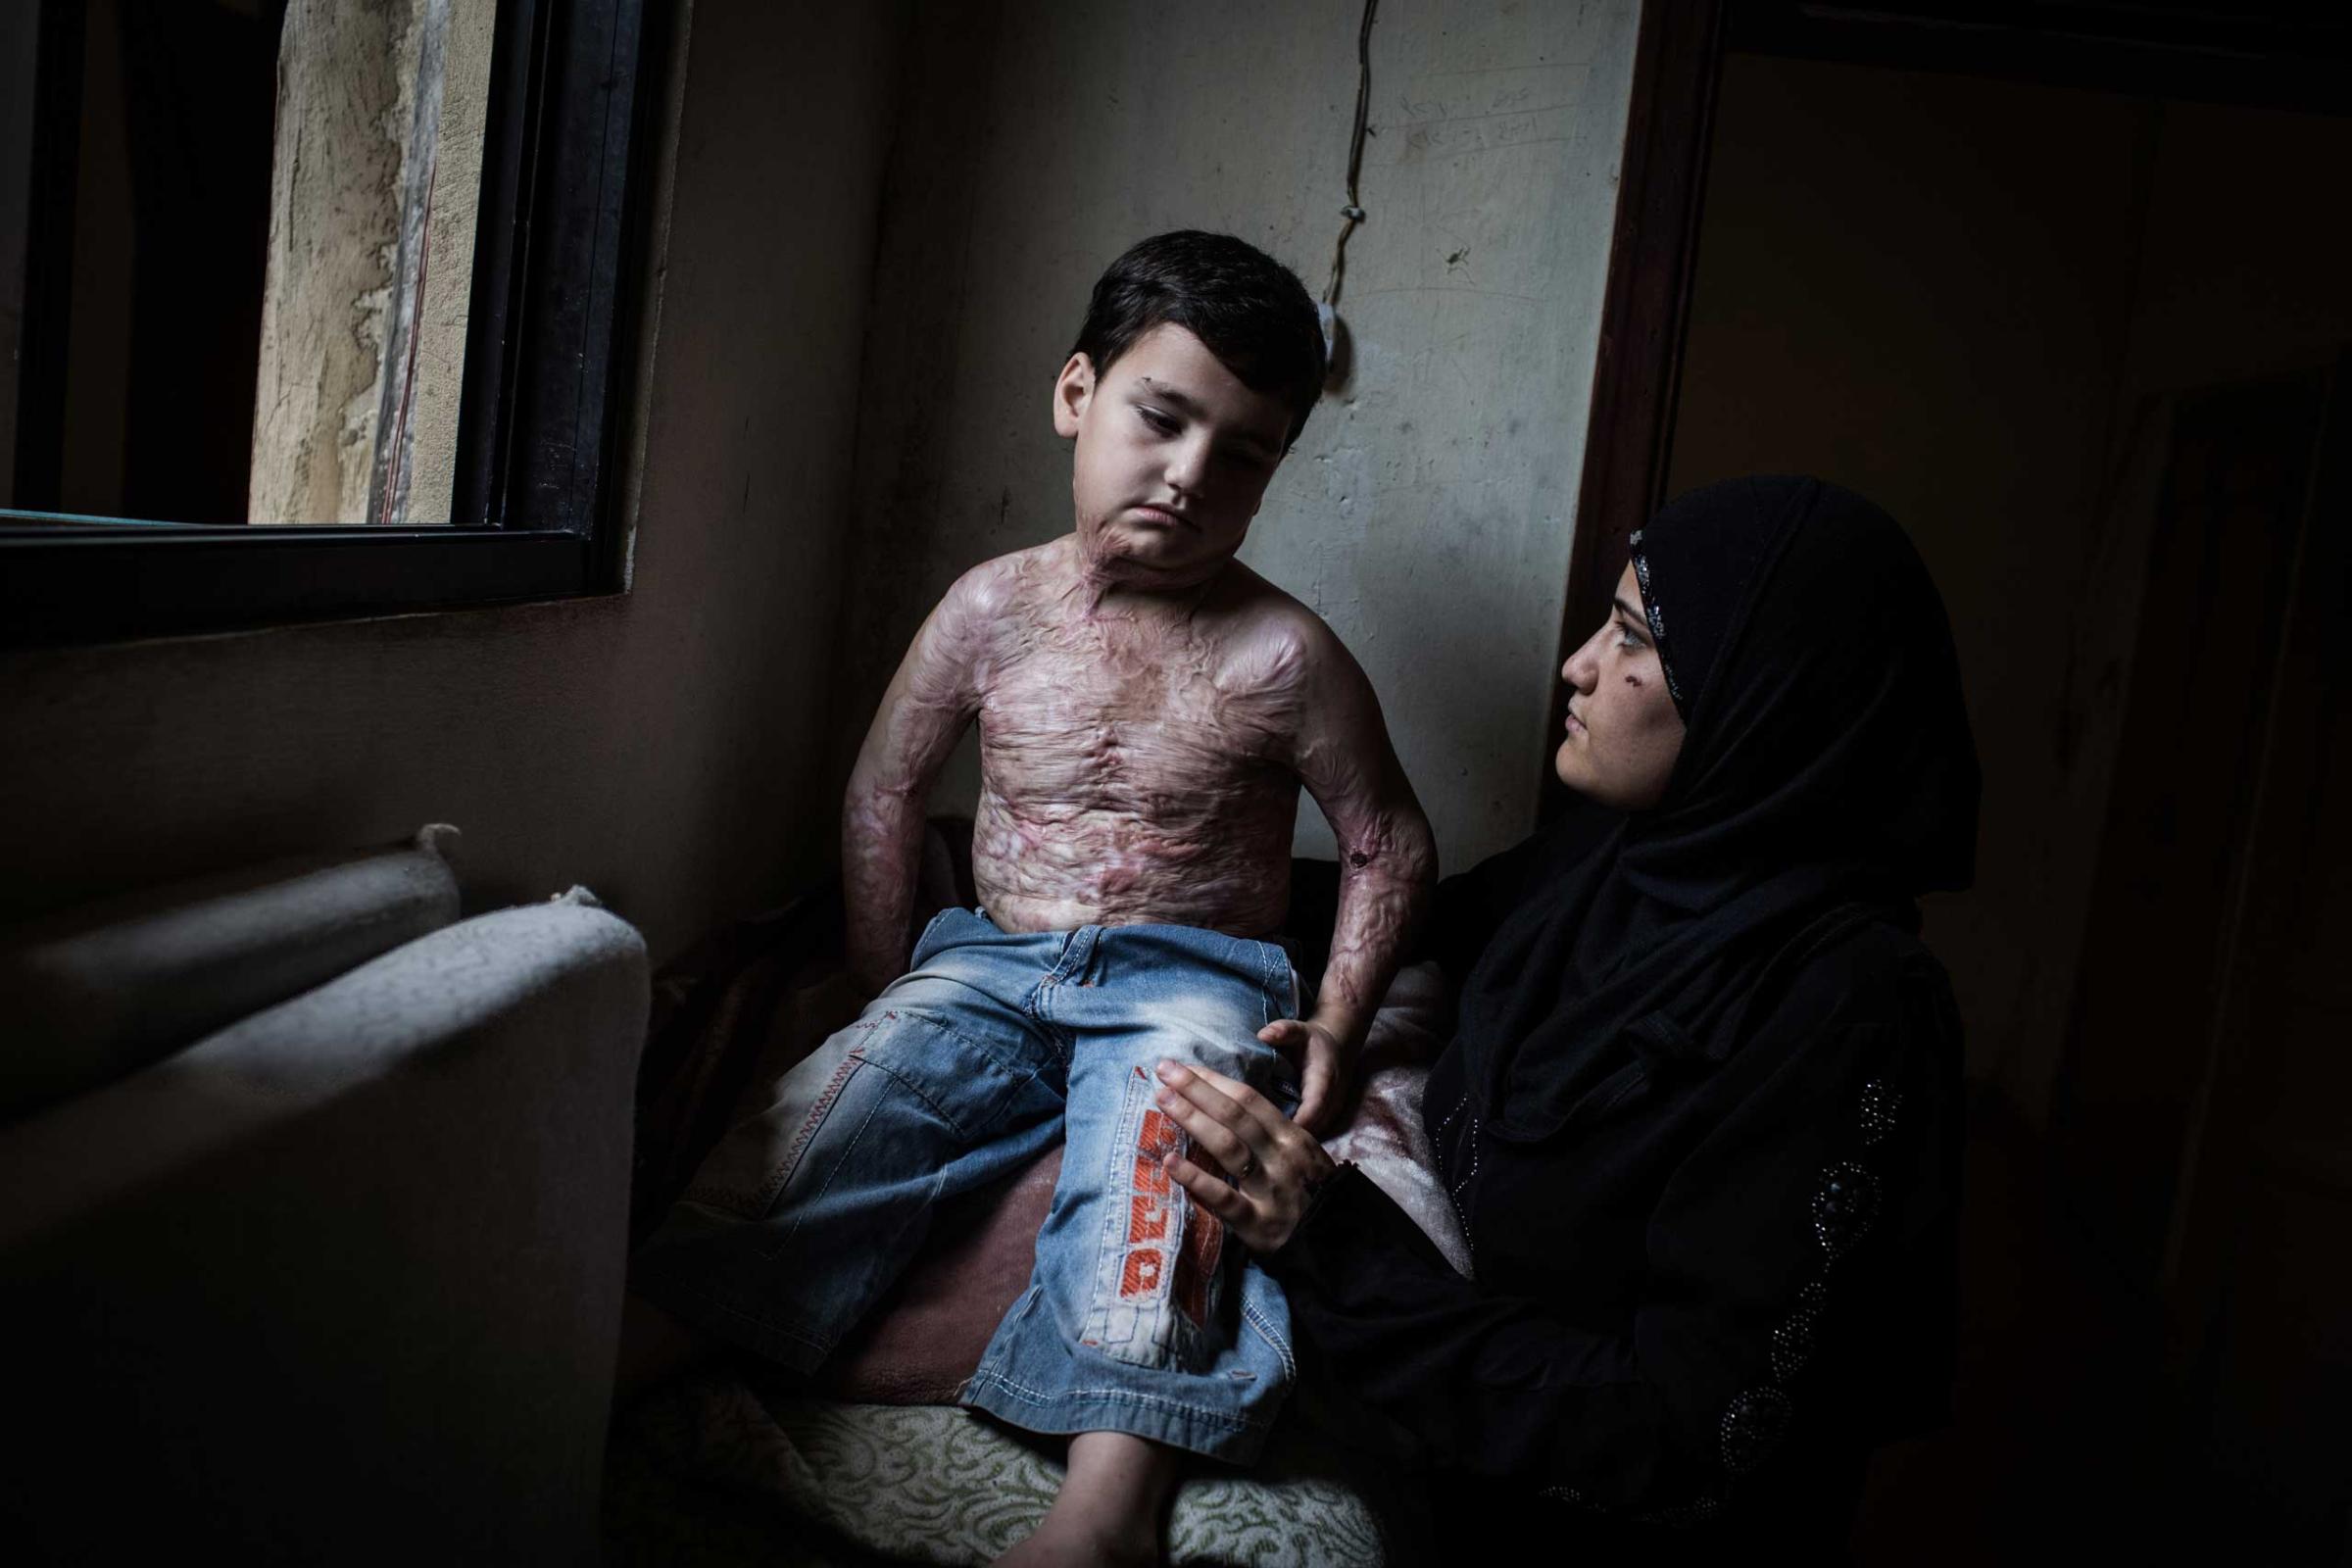 Mohammed, 7, with his mother at a shelter in Donnyeh, Lebanon, June 27, 2014. He was burned by shelling in Homs two years ago; he spent a year getting wounds cleaned and needs several operations and skin grafts.